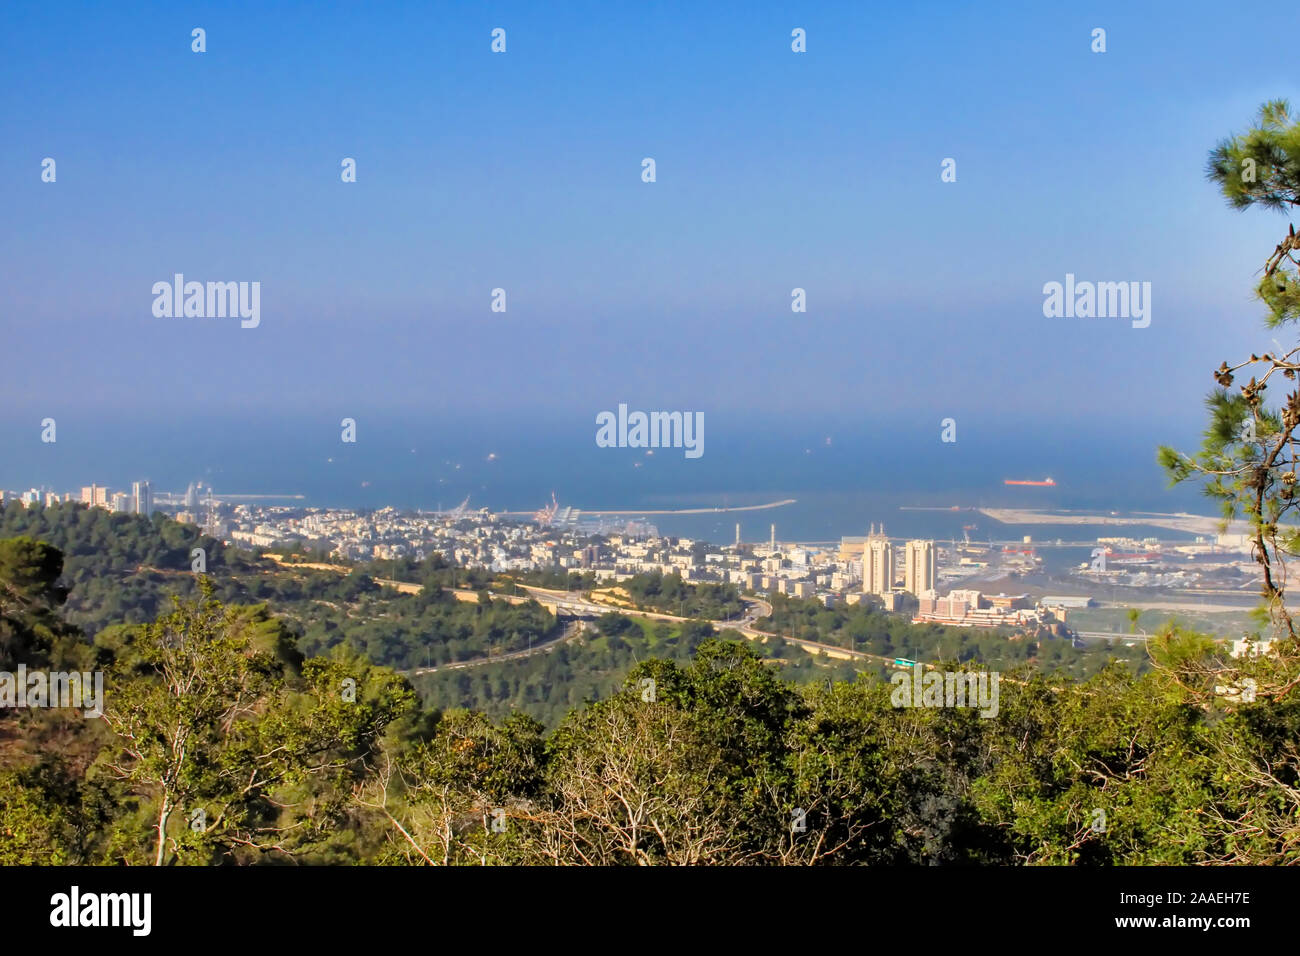 A view of Haifa Harbor from up on Mt Carmel in Israel. Stock Photo